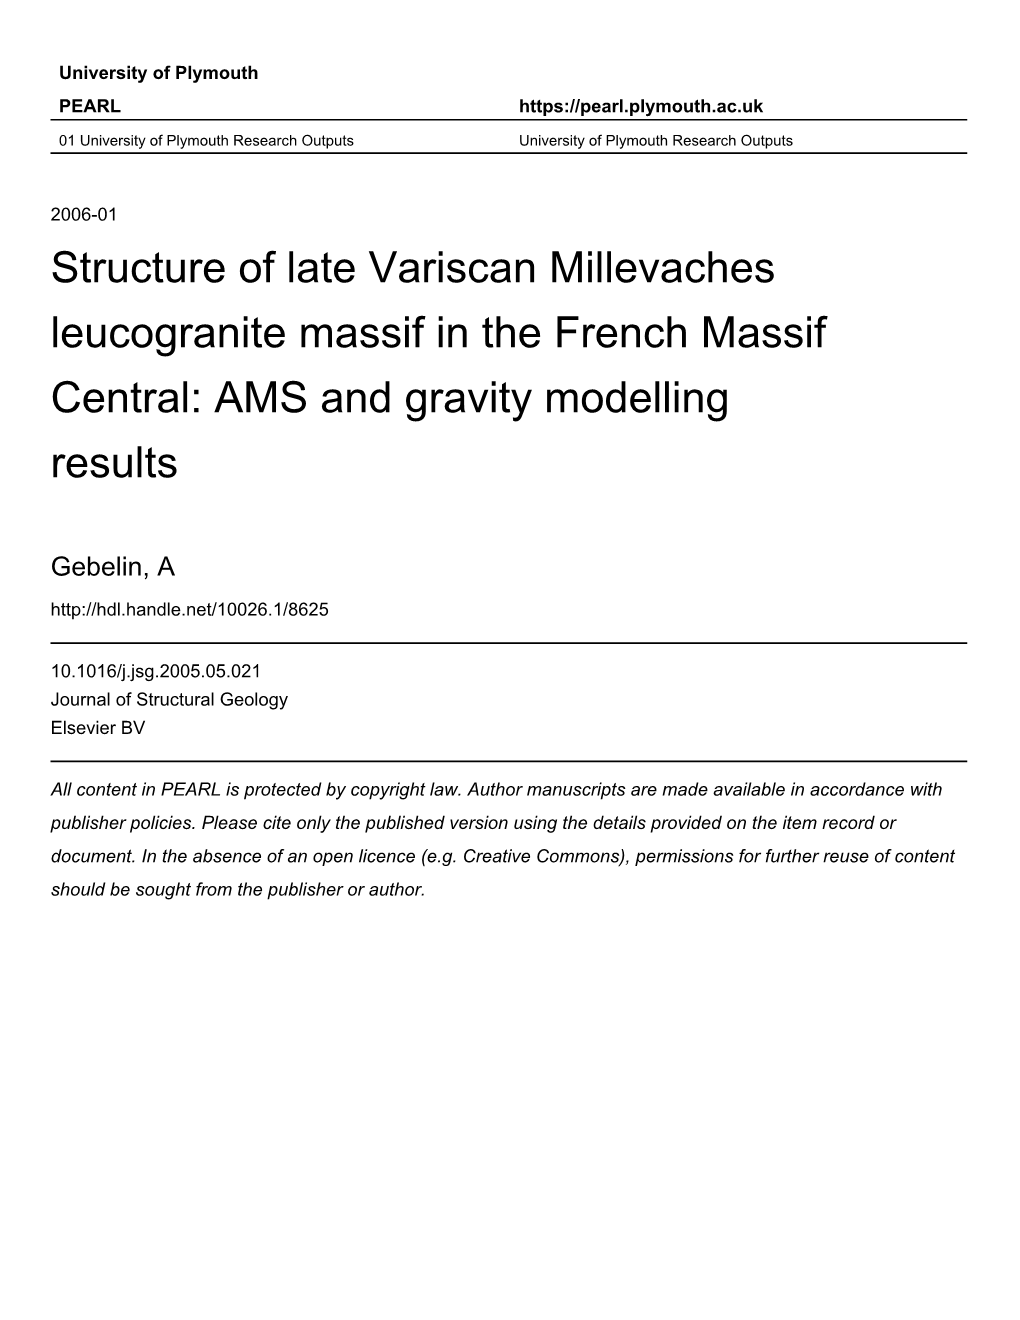 Structure of Late Variscan Millevaches Leucogranite Massif in the French Massif Central: AMS and Gravity Modelling Results